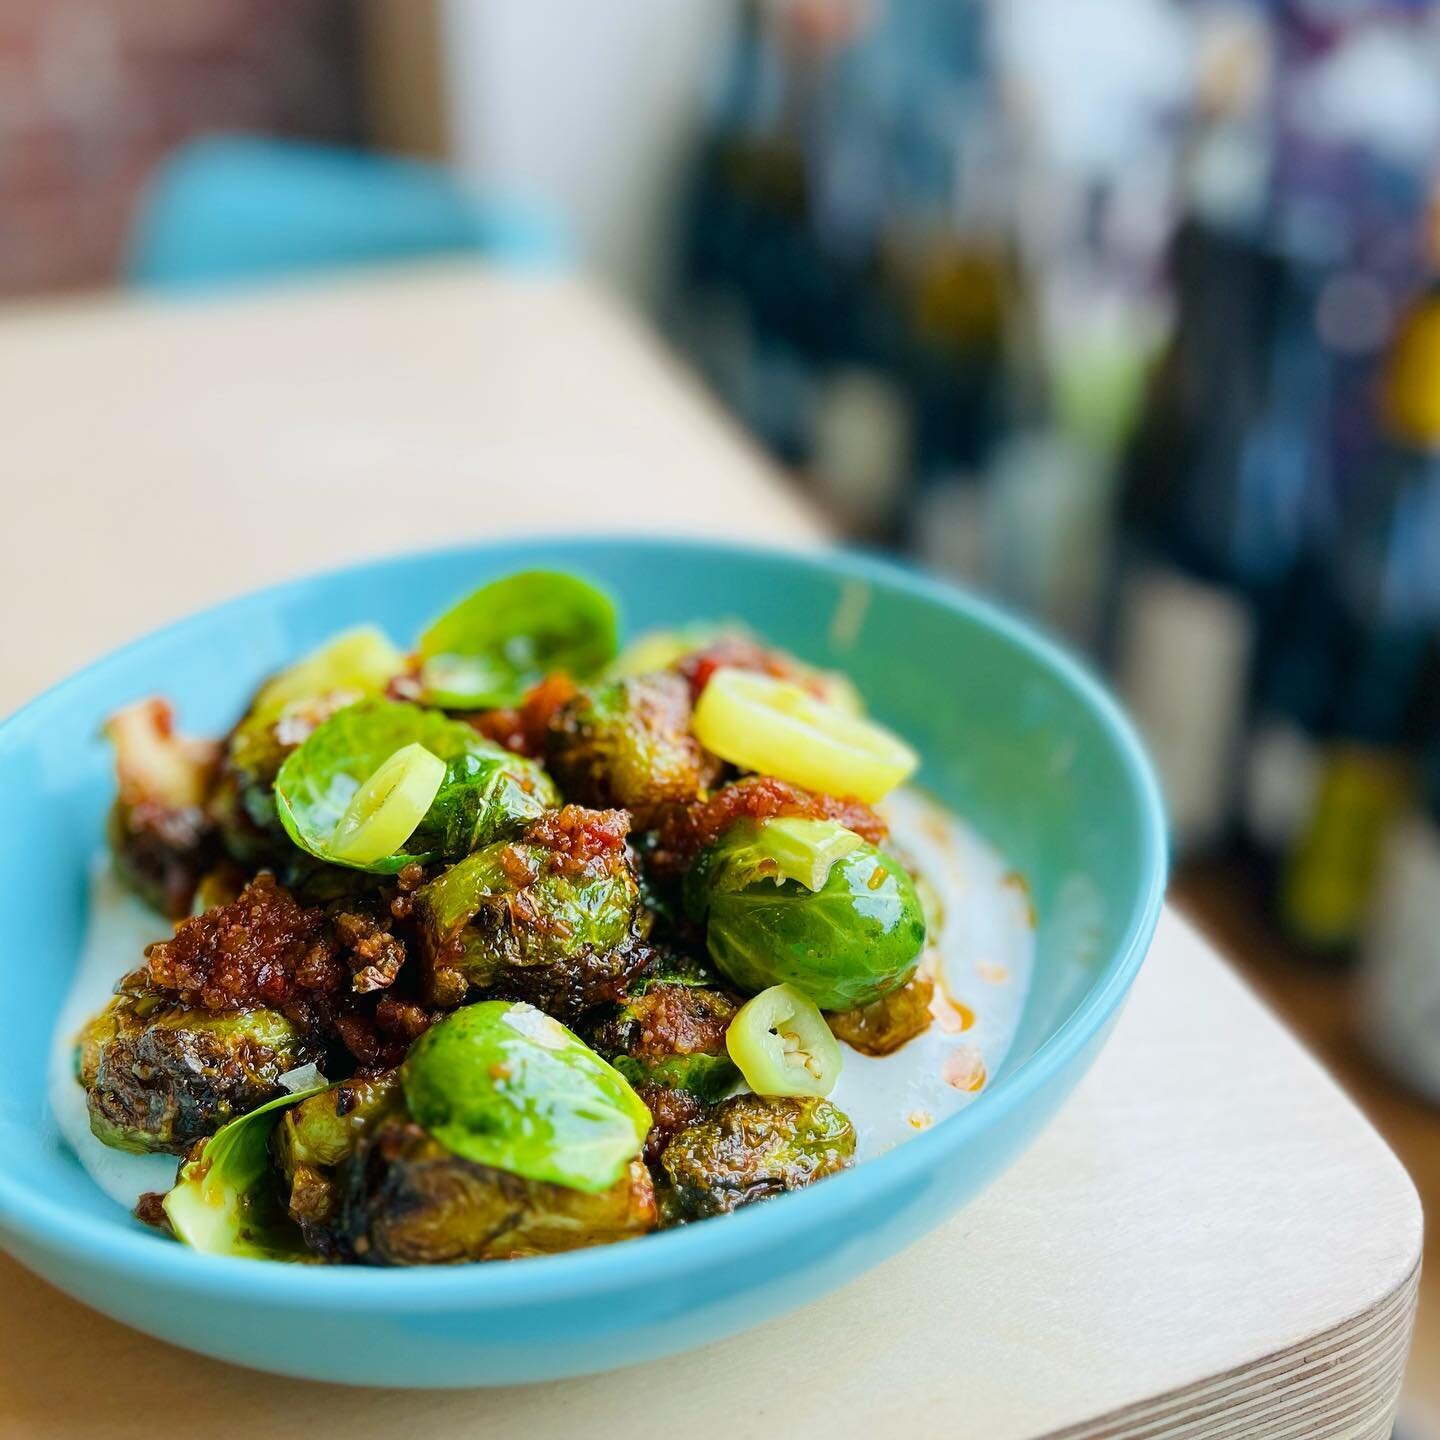 BRUSSELS SPROUTS MAN! 

Fall brings with it the triumphant return of Ottawa&rsquo;s favourite fart manufacturer! 😅

We&rsquo;re changing it up a bit this year with these mini cabbages. Deep fried, tossed with a sauce made from grinding down cured po